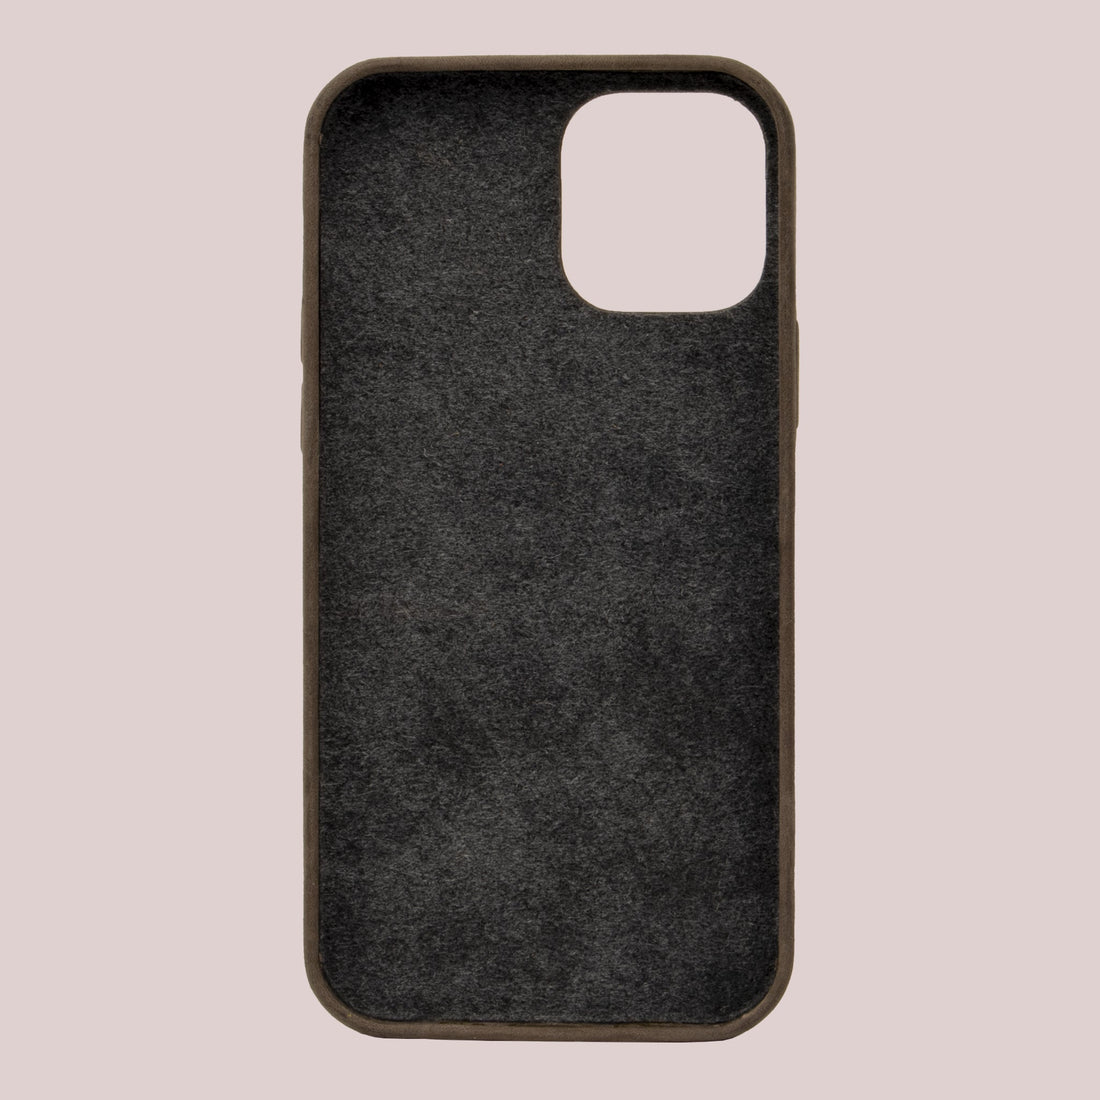 Baxter Card Case for iPhone 12 Mini - Vintage Tan